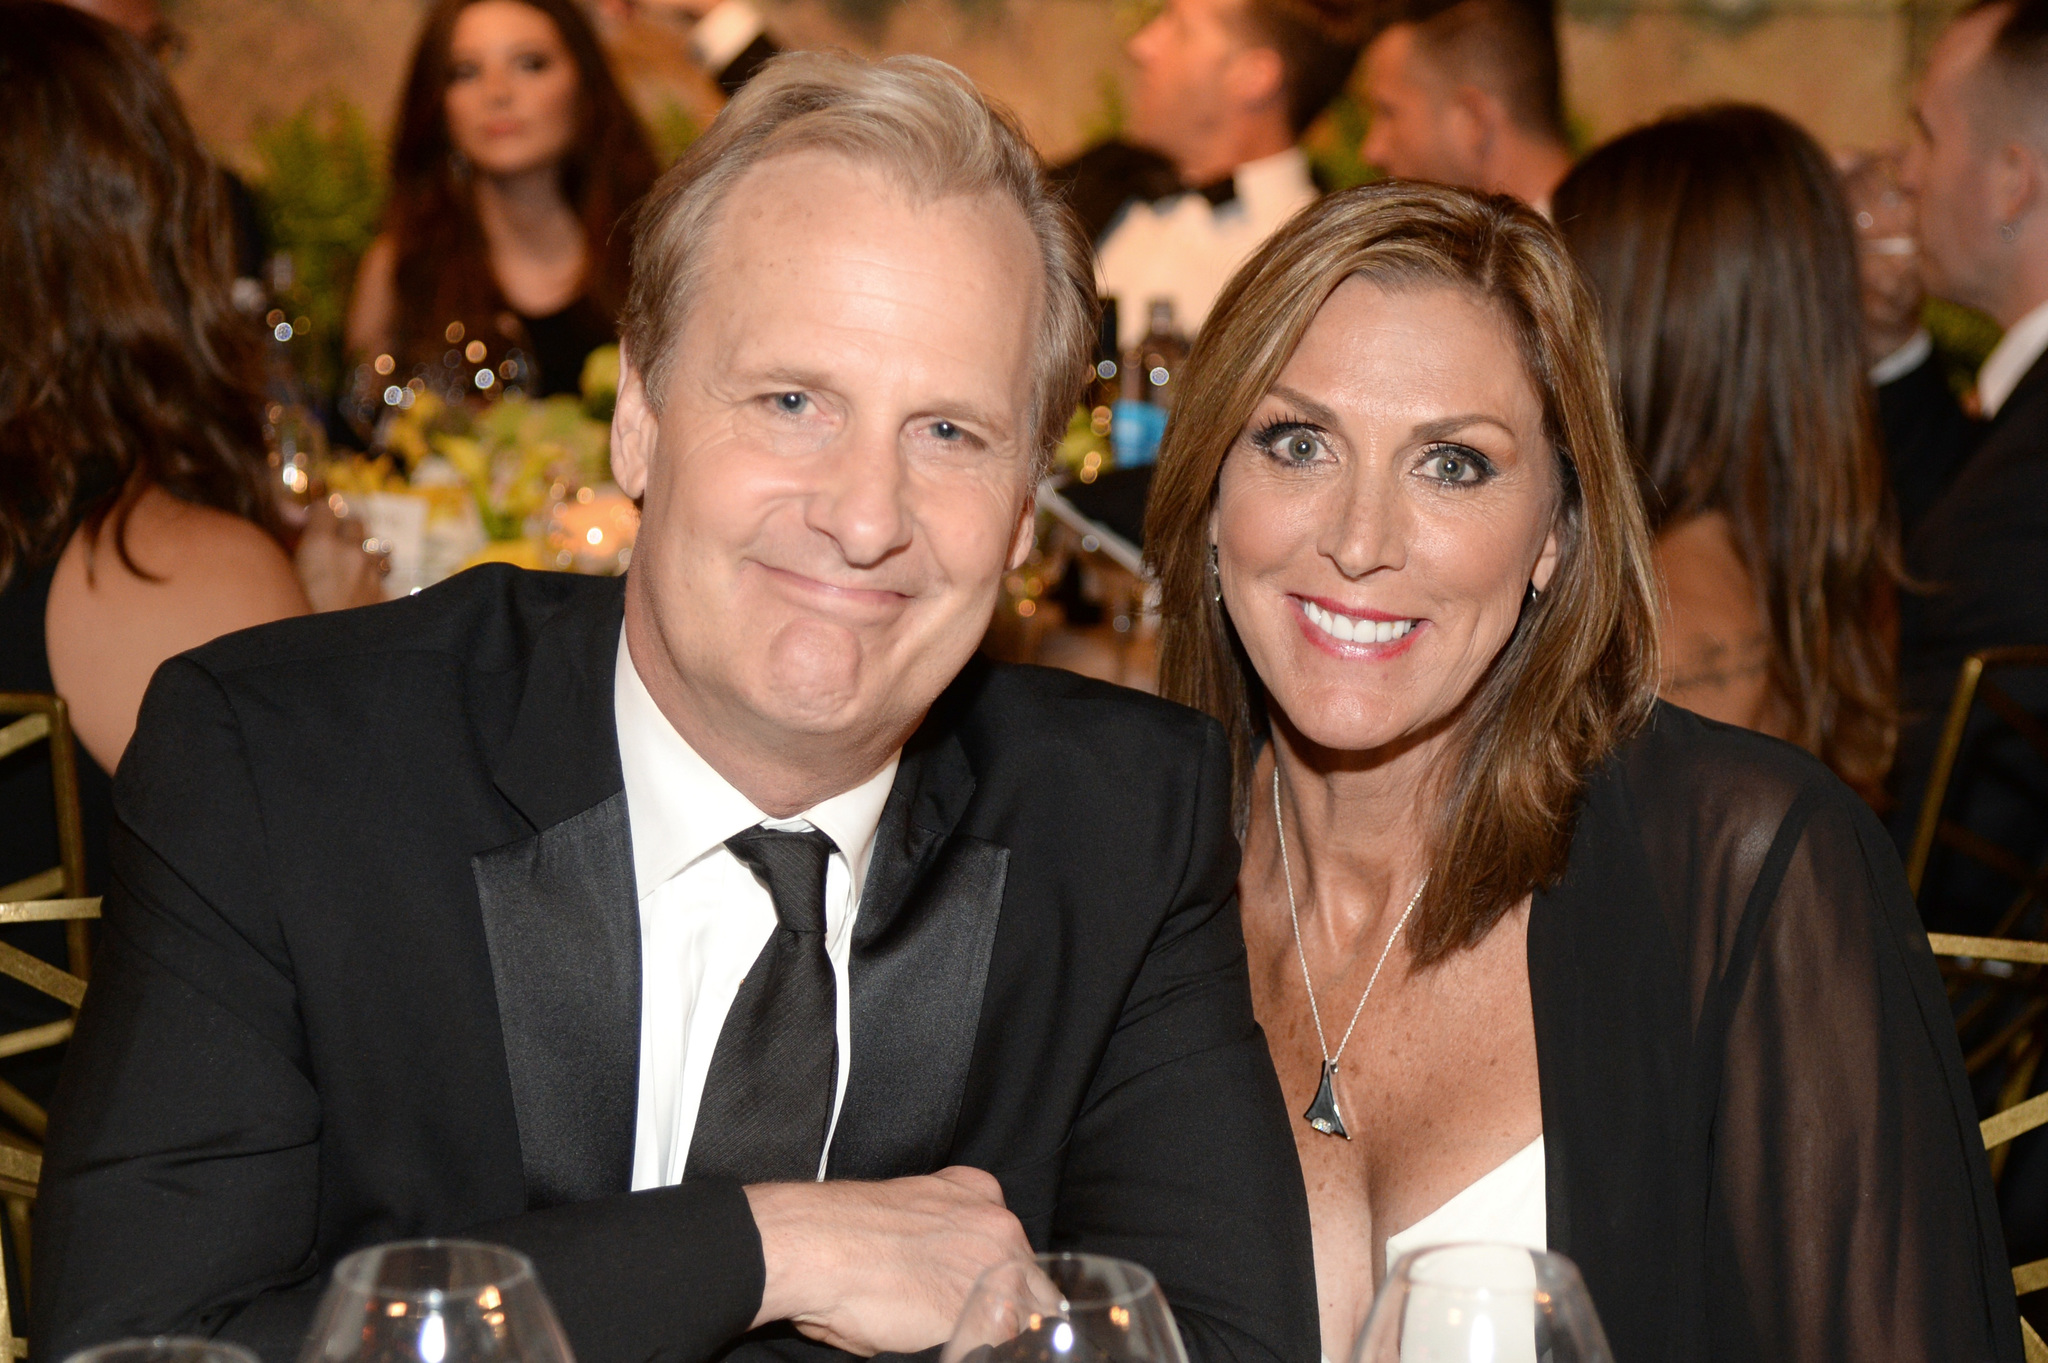 Actor Jeff Daniels (L) and Kathleen Rosemary Treado attend the 2014 AFI Life Achievement Award: A Tribute to Jane Fonda at the Dolby Theatre on June 5, 2014 in Hollywood, California. Tribute